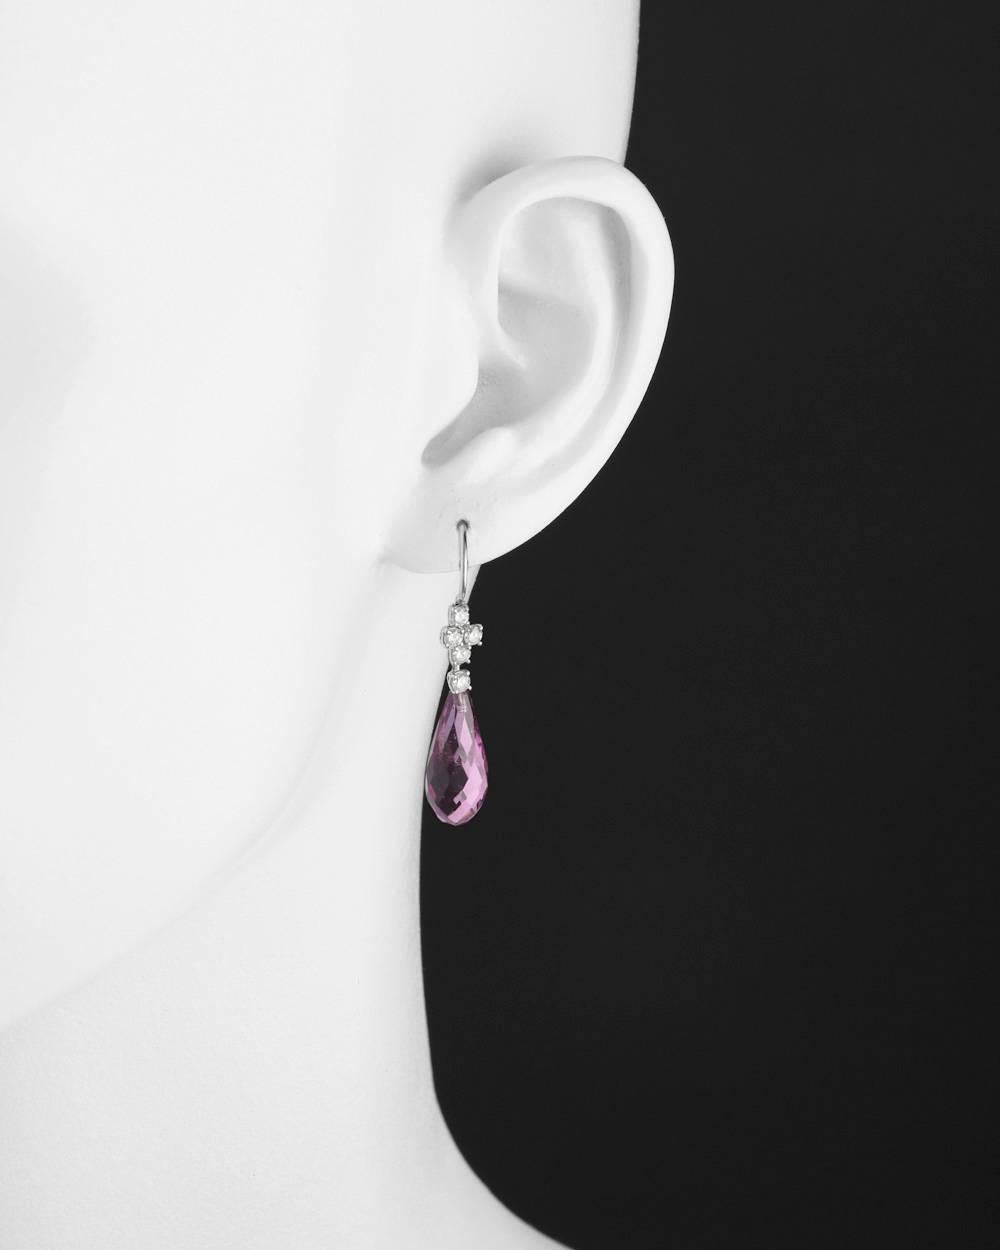 Pendant earrings, showcasing a pair of briolette-cut pink tourmaline drops weighing 13.56 total carats, with a diamond cluster surmount composed of ten round diamonds weighing 0.50 total carats, on French wires, in platinum. 1.4